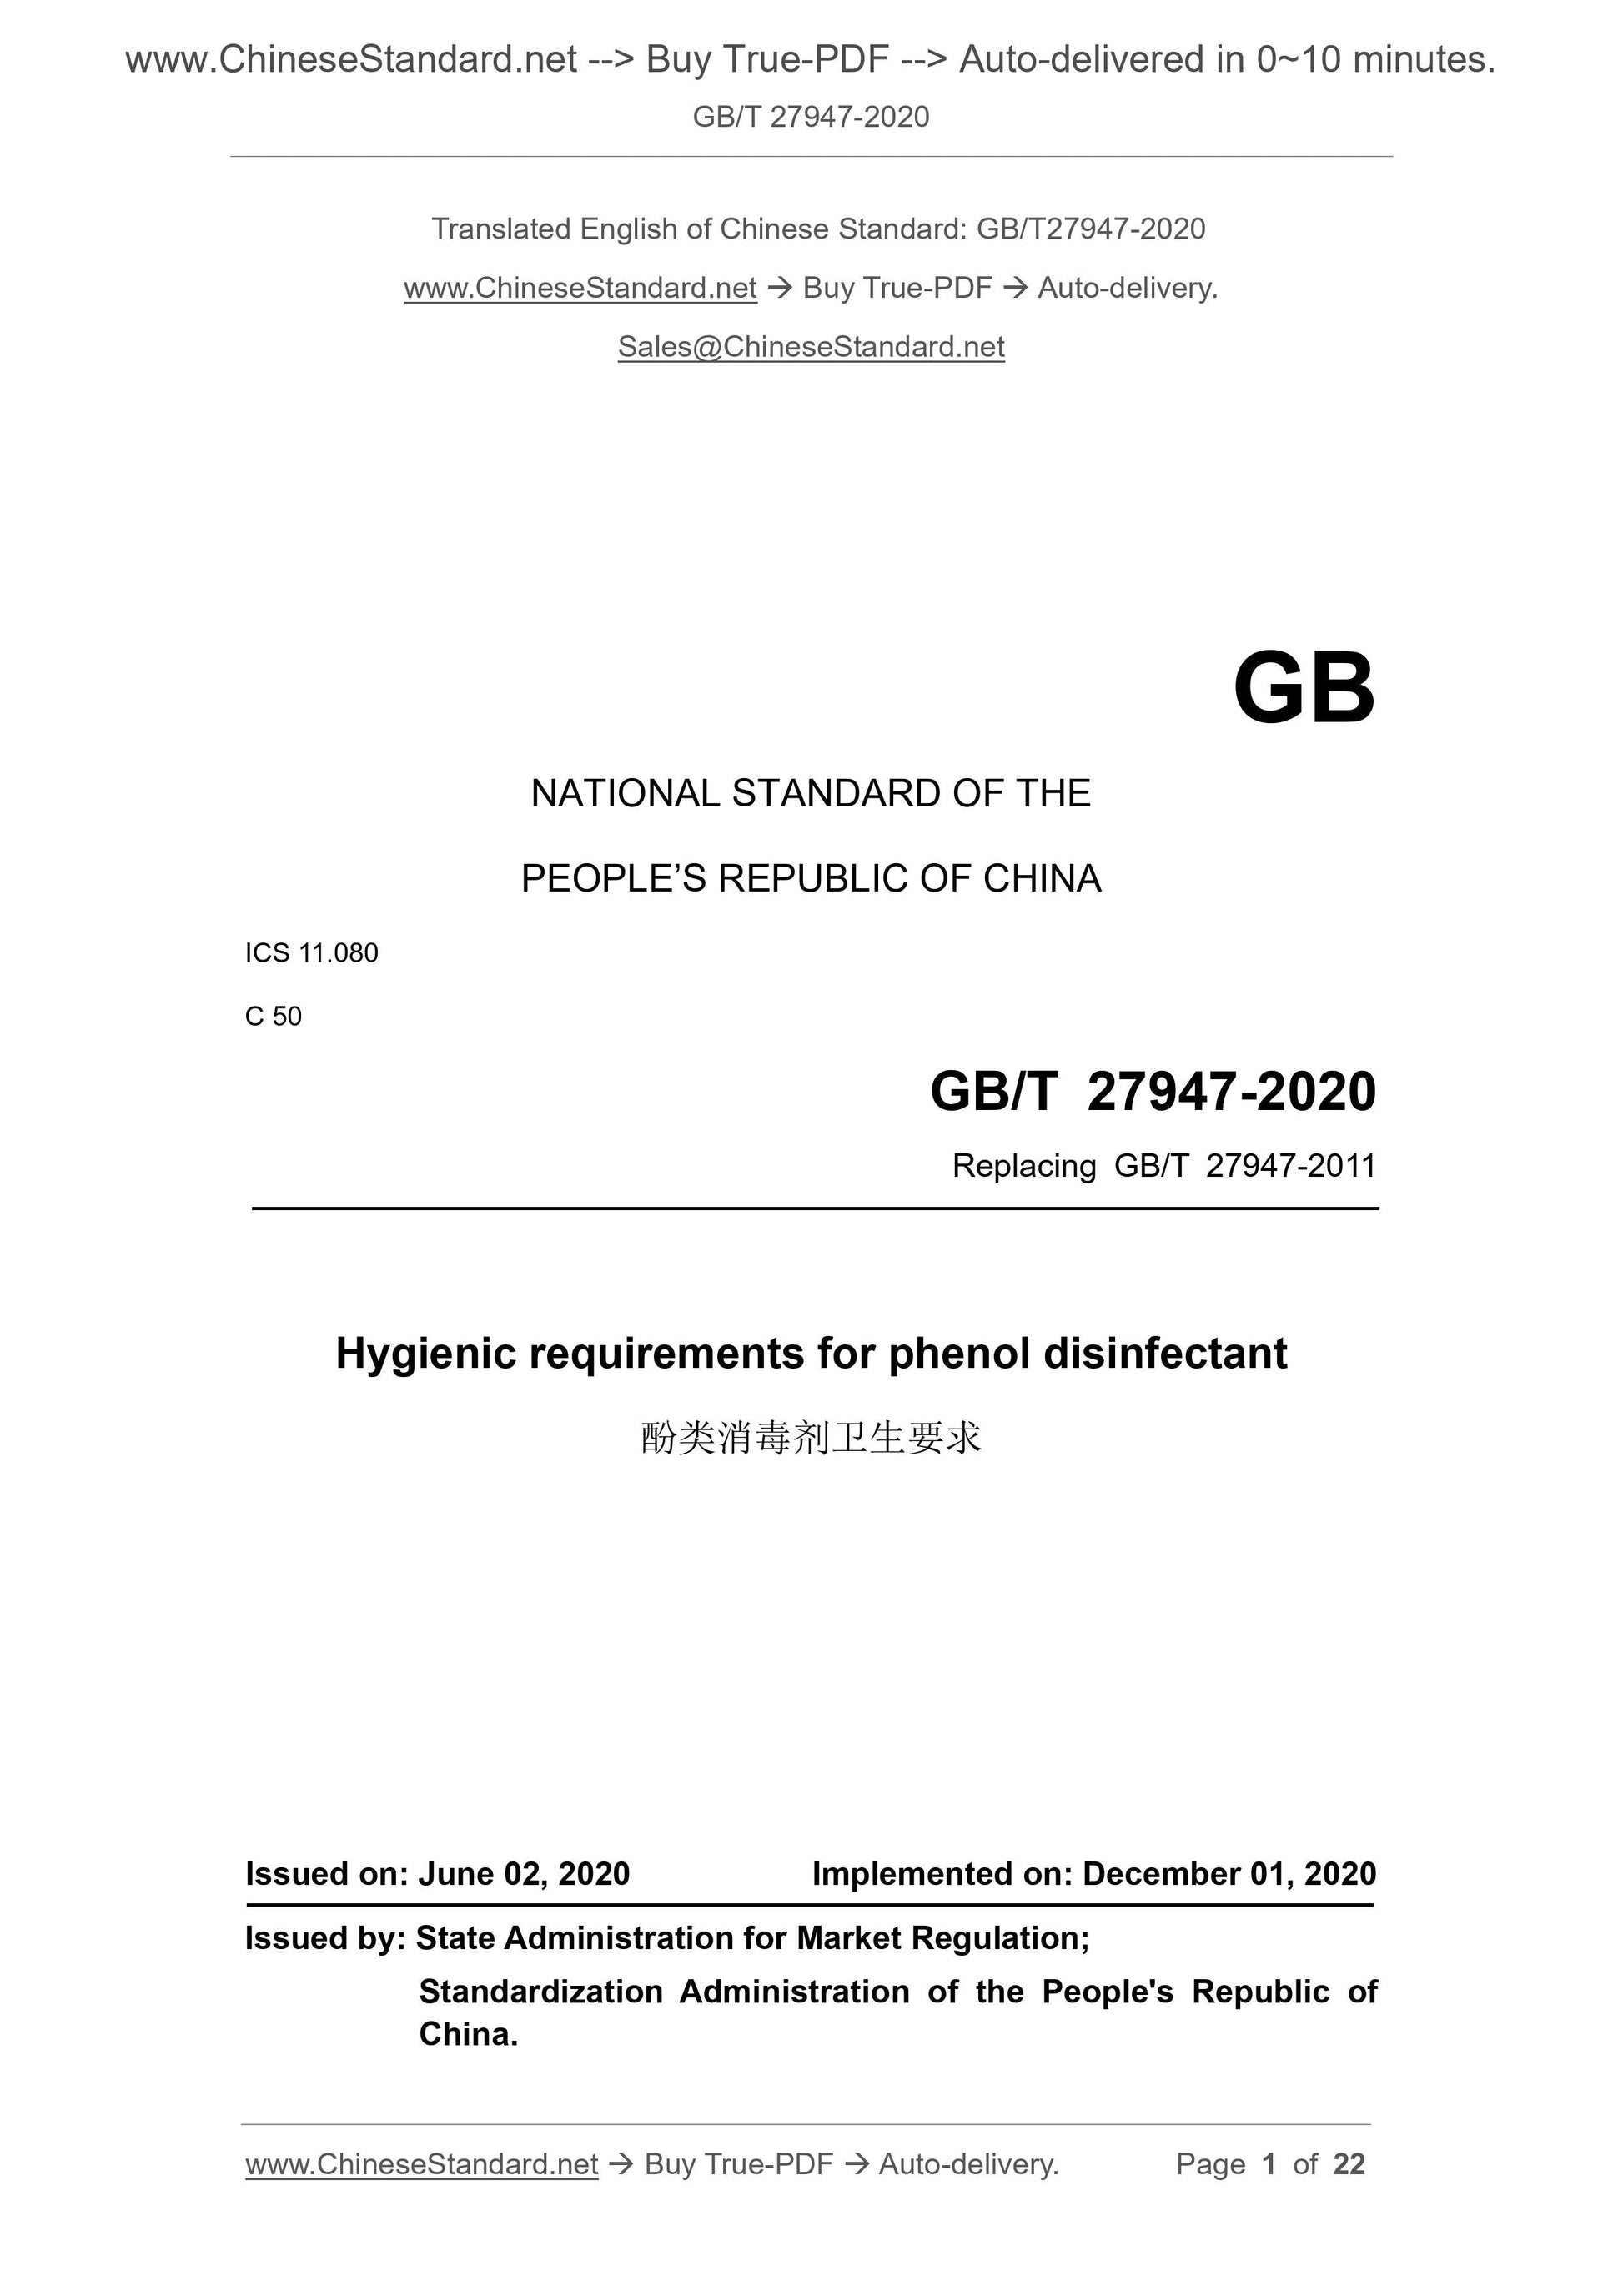 GB/T 27947-2020 Page 1